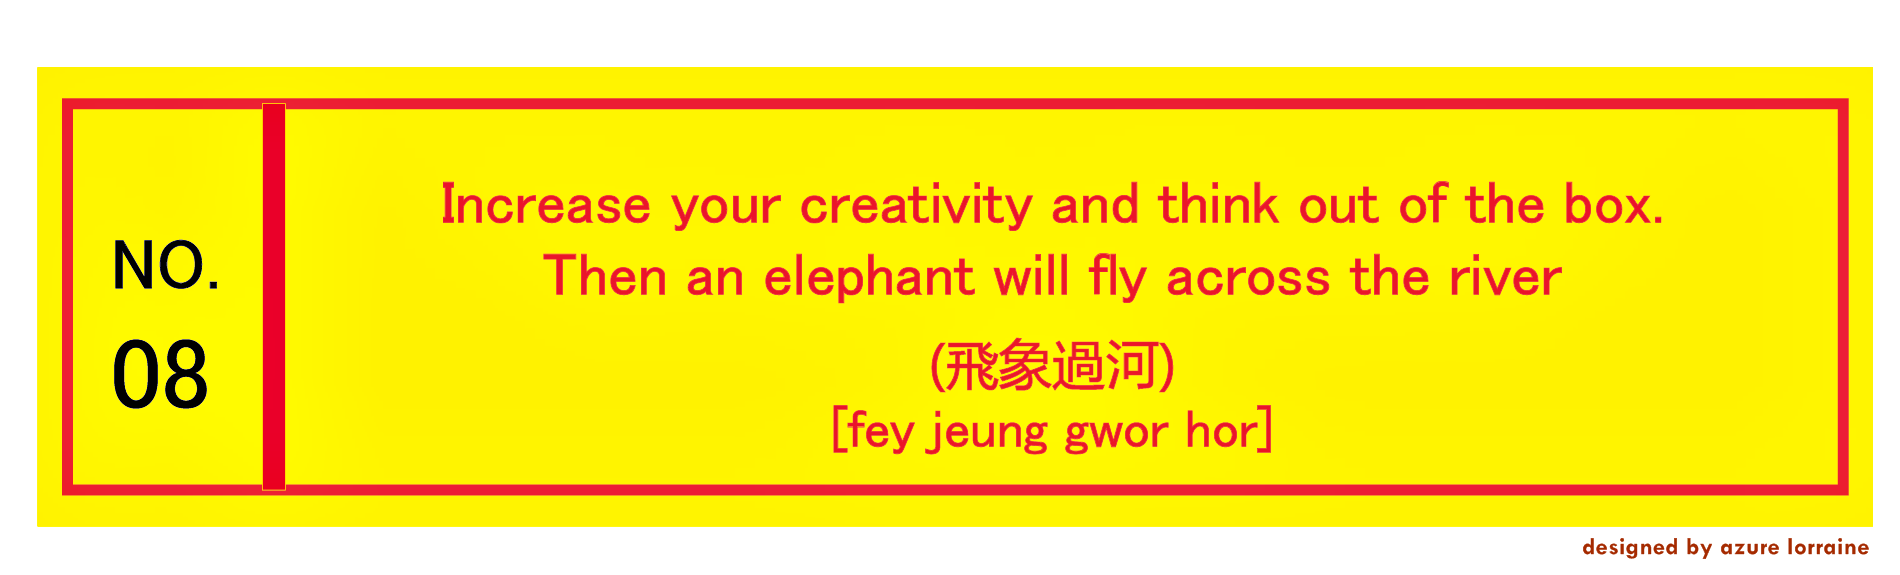 8. Increase your creativity and think out of the box. Then an elephant will fly across the river.飛象過河 [fey jeung gwor hor]